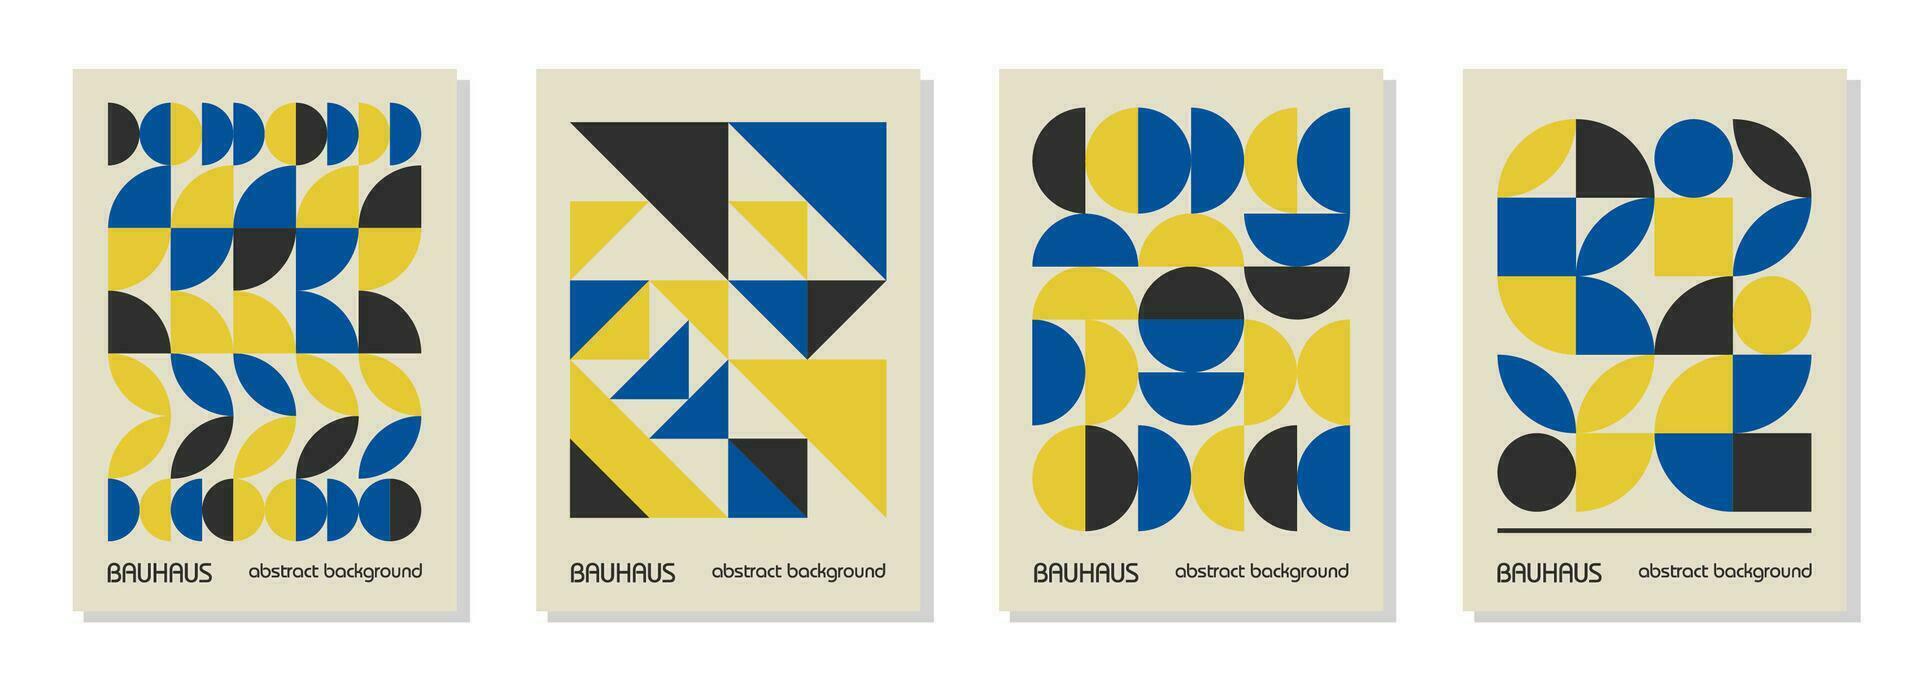 Set of 4 minimal vintage 20s geometric design posters, wall art, template, layout with primitive shapes elements. Bauhaus retro pattern vector background, blue, yellow and black Ukrainian flag colors